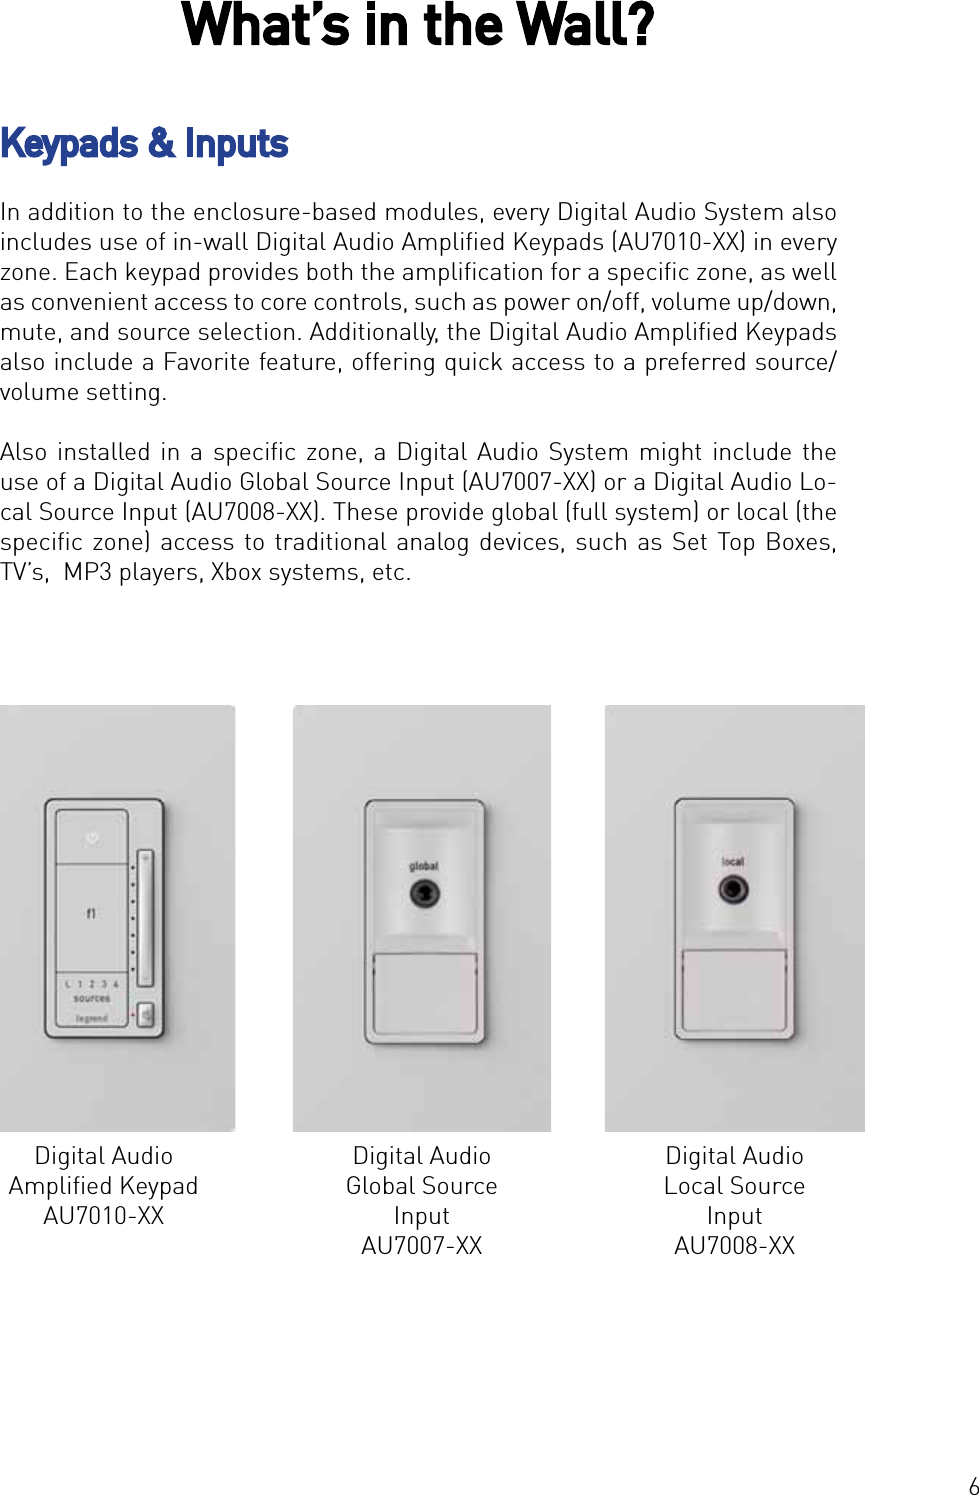 6In addition to the enclosure-based modules, every Digital Audio System also includes use of in-wall Digital Audio Ampliﬁed Keypads (AU7010-XX) in every zone. Each keypad provides both the ampliﬁcation for a speciﬁc zone, as well as convenient access to core controls, such as power on/off, volume up/down, mute, and source selection. Additionally, the Digital Audio Ampliﬁed Keypads also include a Favorite feature, offering quick access to a preferred source/volume setting. Also installed in a speciﬁc zone, a Digital Audio System might include the use of a Digital Audio Global Source Input (AU7007-XX) or a Digital Audio Lo-cal Source Input (AU7008-XX). These provide global (full system) or local (the speciﬁc zone) access to traditional analog devices, such as Set Top Boxes, TV’s,  MP3 players, Xbox systems, etc.What’s in the Wall?Digital Audio Ampliﬁed KeypadAU7010-XXDigital Audio Global Source InputAU7007-XXDigital Audio Local Source InputAU7008-XXKeypads &amp; Inputs